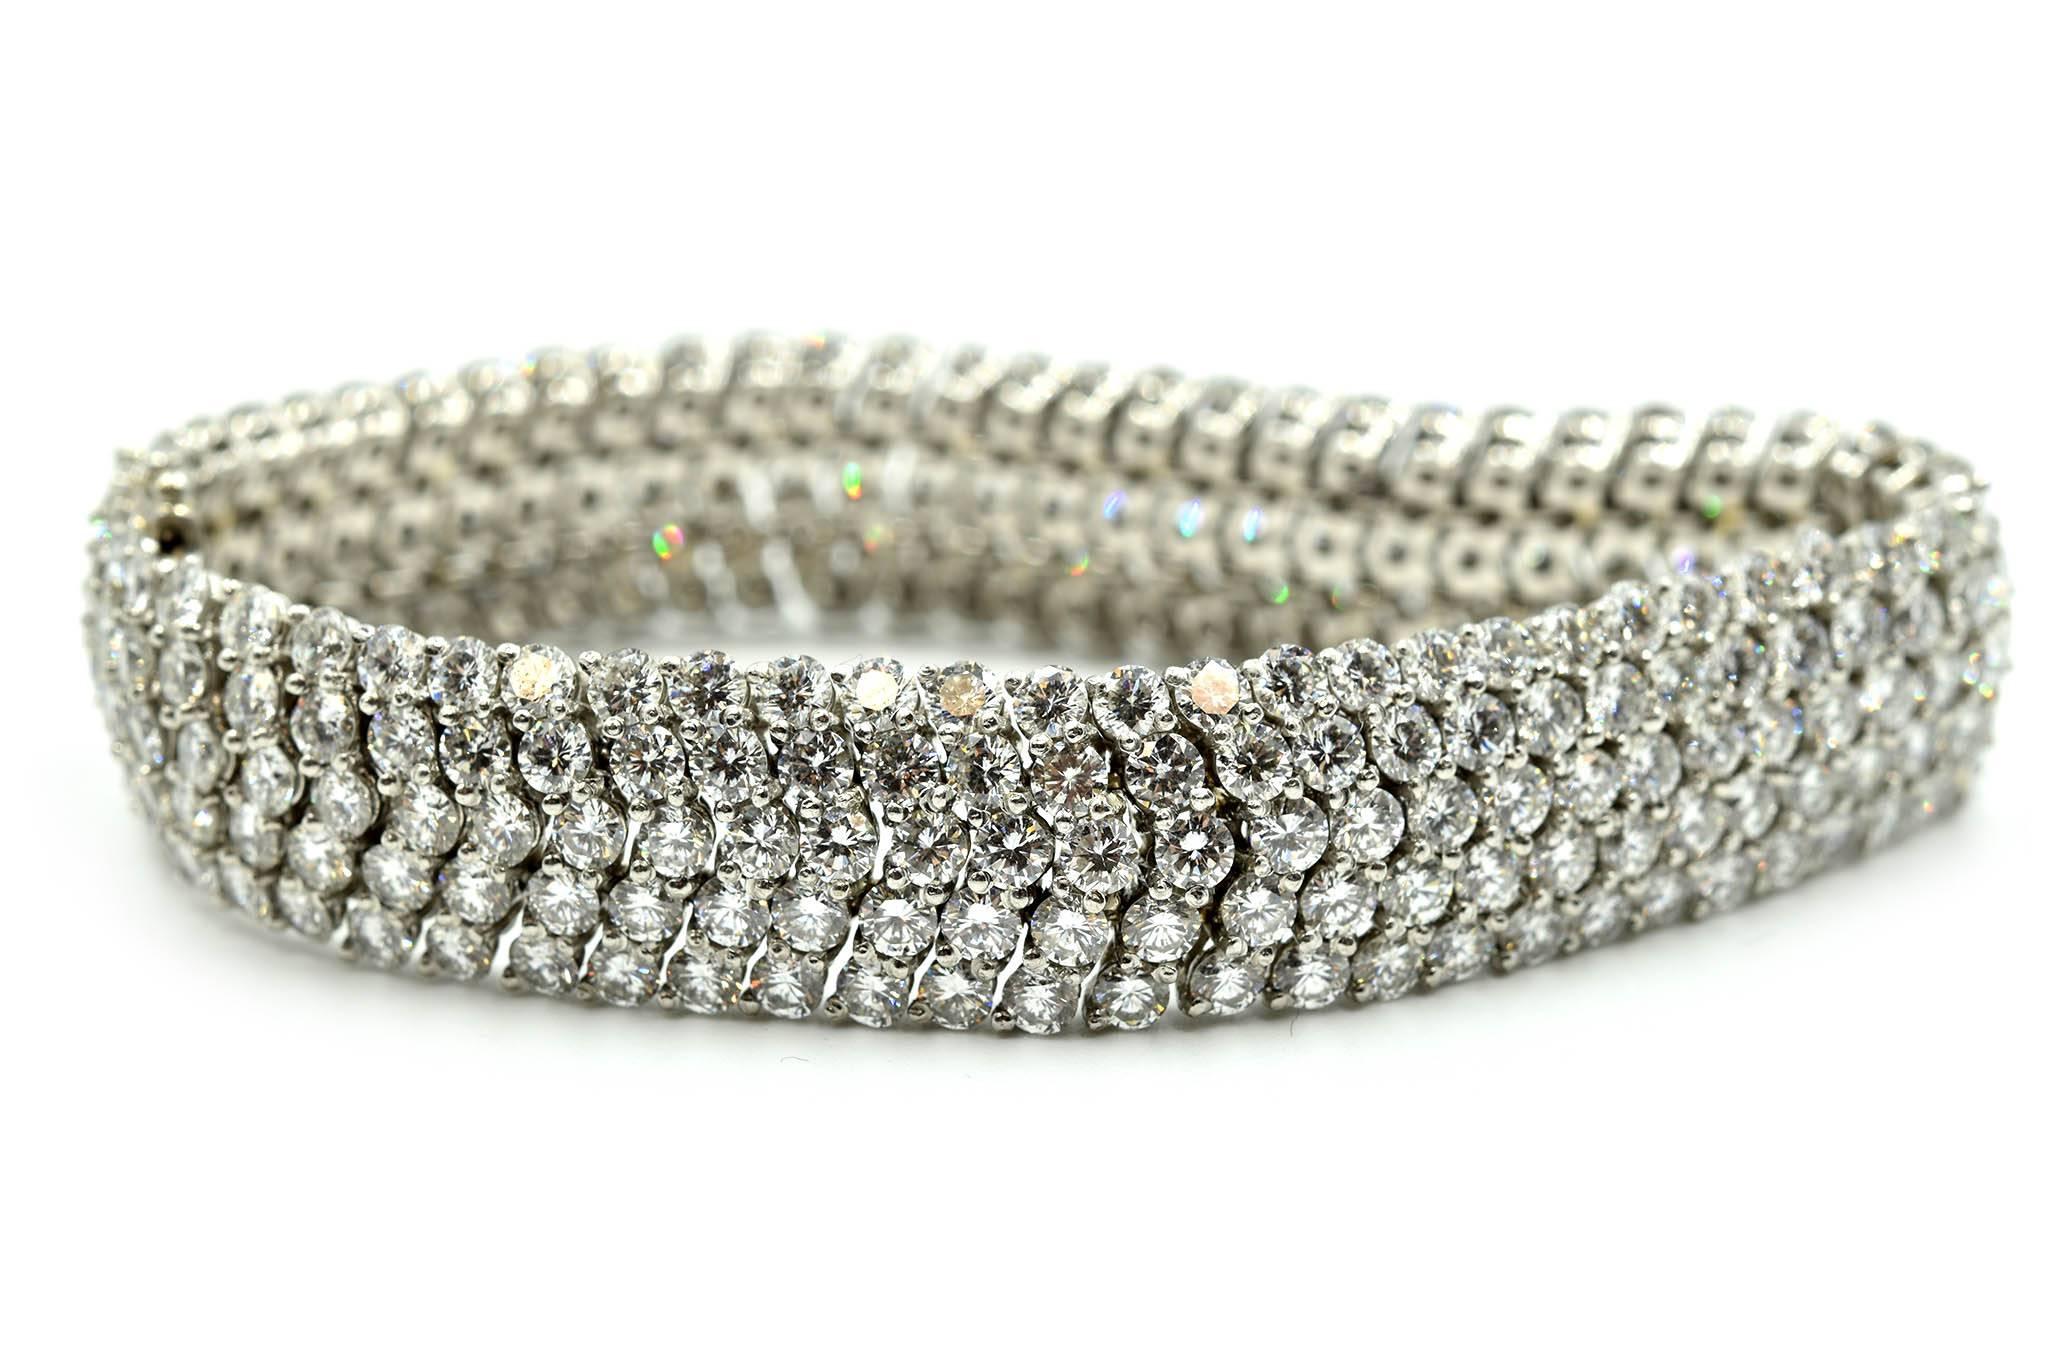 This bracelet scintillates like stars. The round diamonds weigh 30.00 carats. The diamonds are graded G in color and VS in clarity. The bracelet measures 13.23mm in width and 7” inches in length. The diamond 18k white gold bracelet weighs 65.43